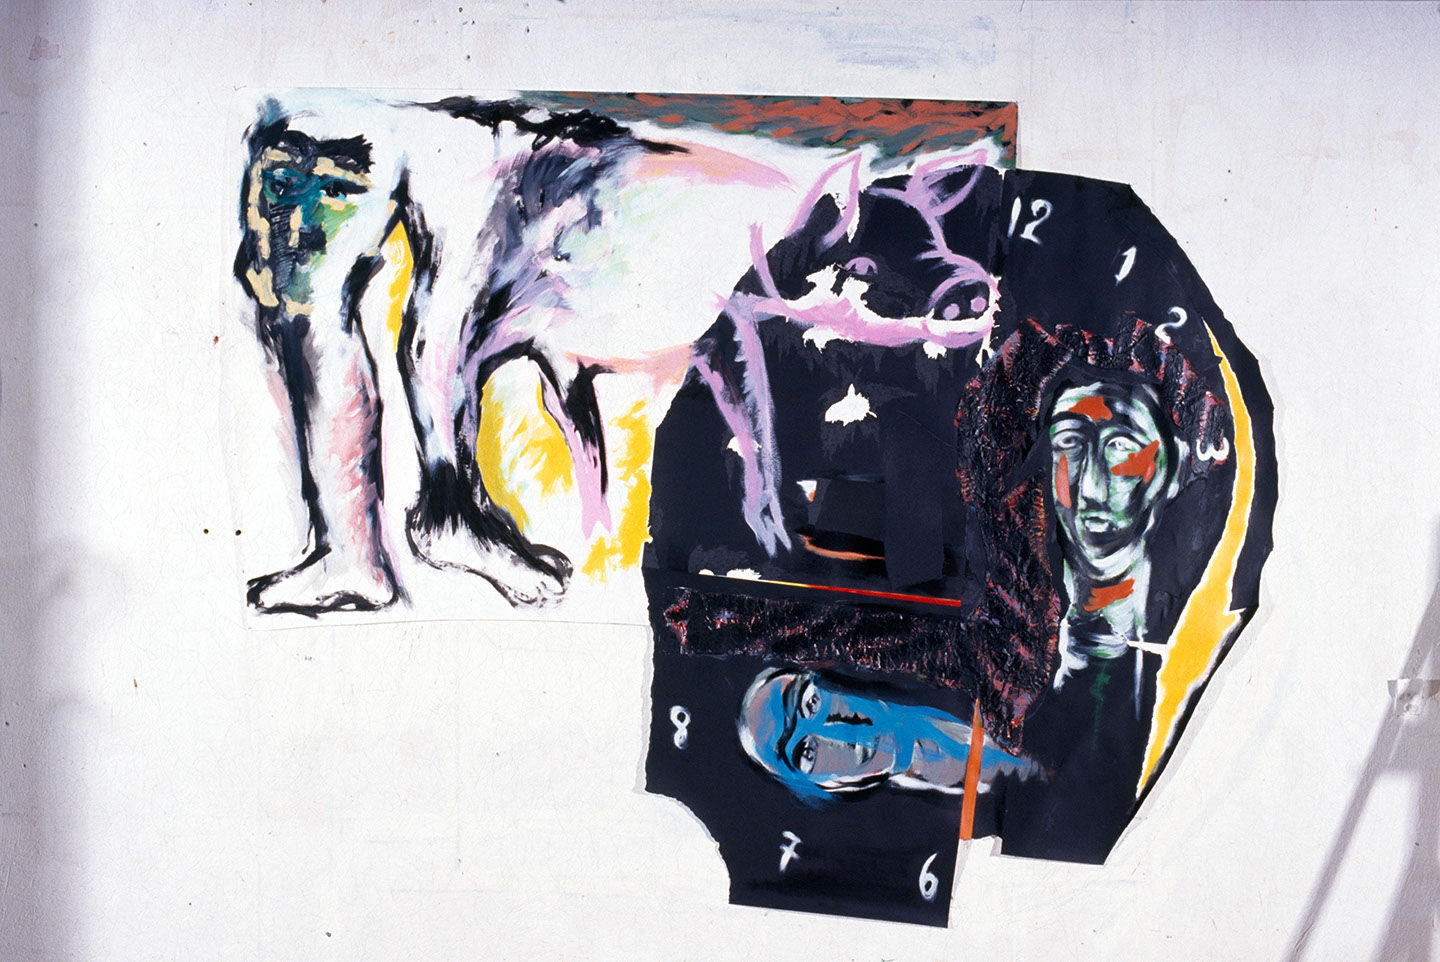 Title: The time of the pigs
Materials: Acrylic collage
Size: 180x260 cm
Year: 1986